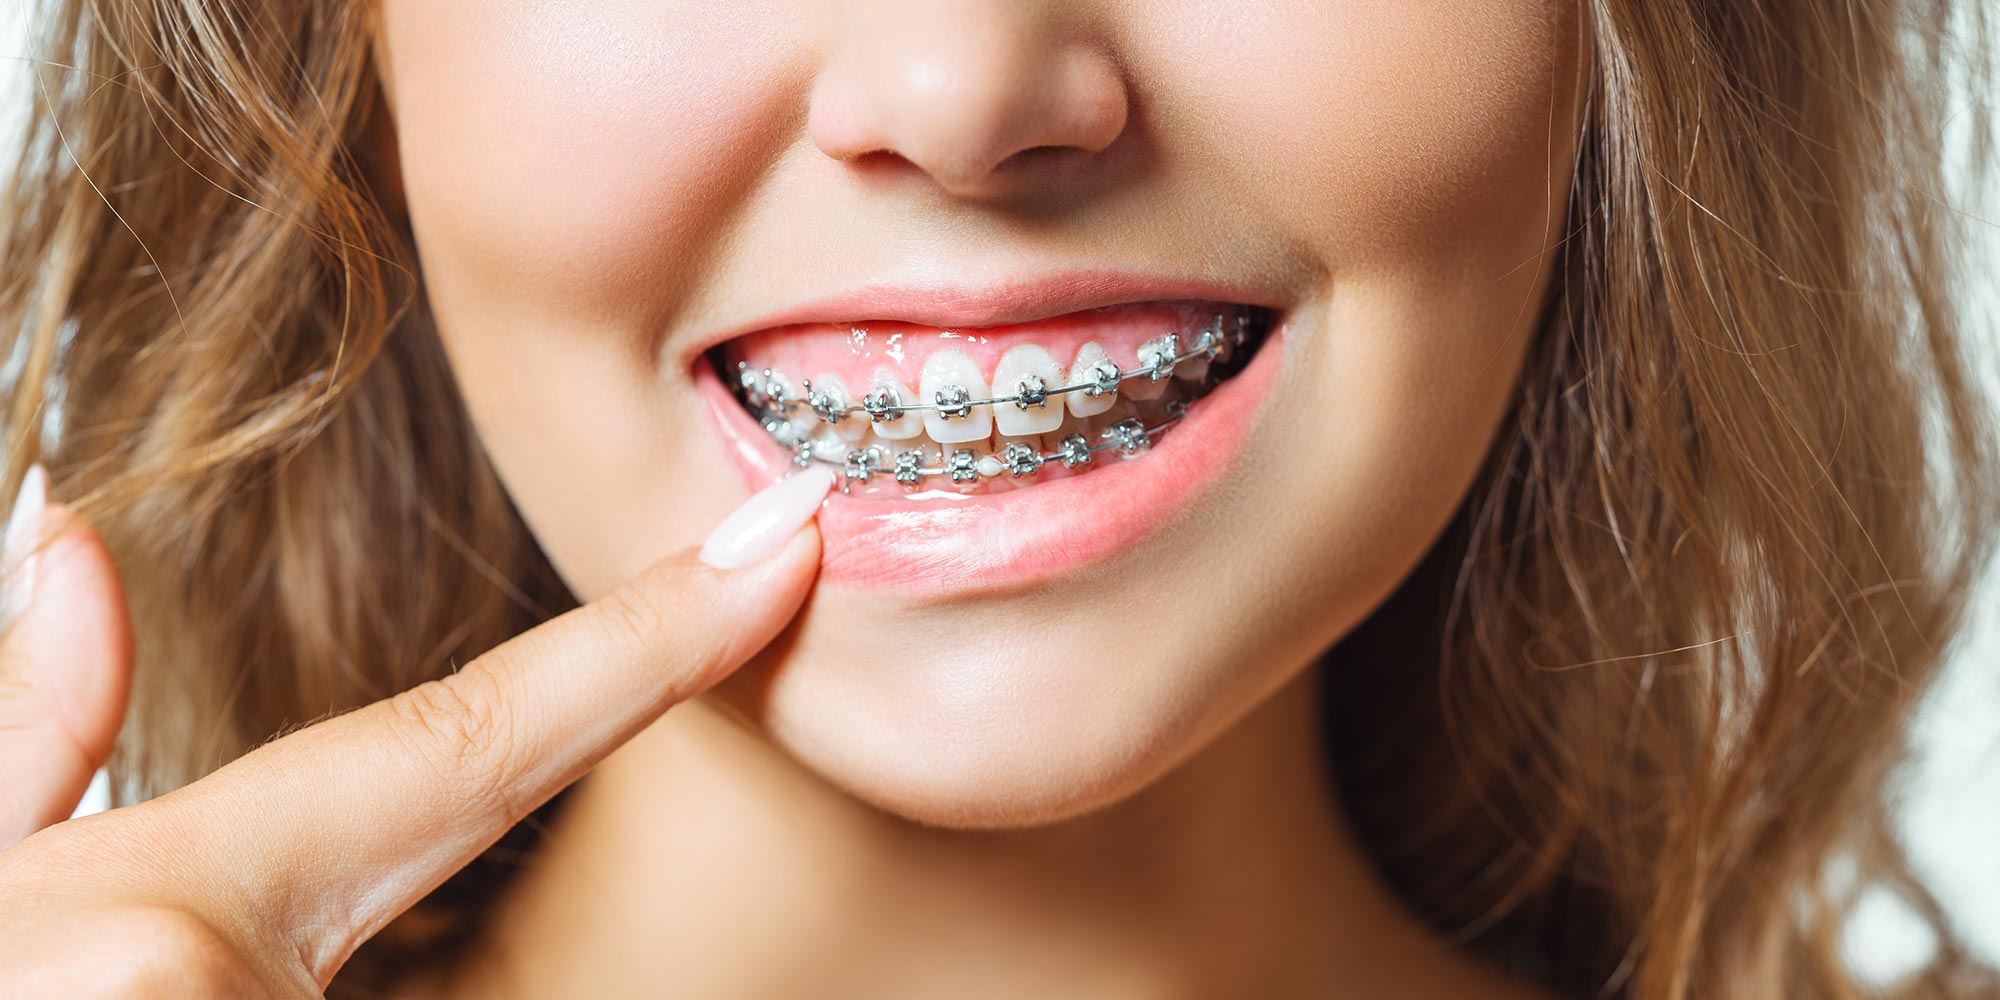 Looking for an Orthodontist in Salisbury?